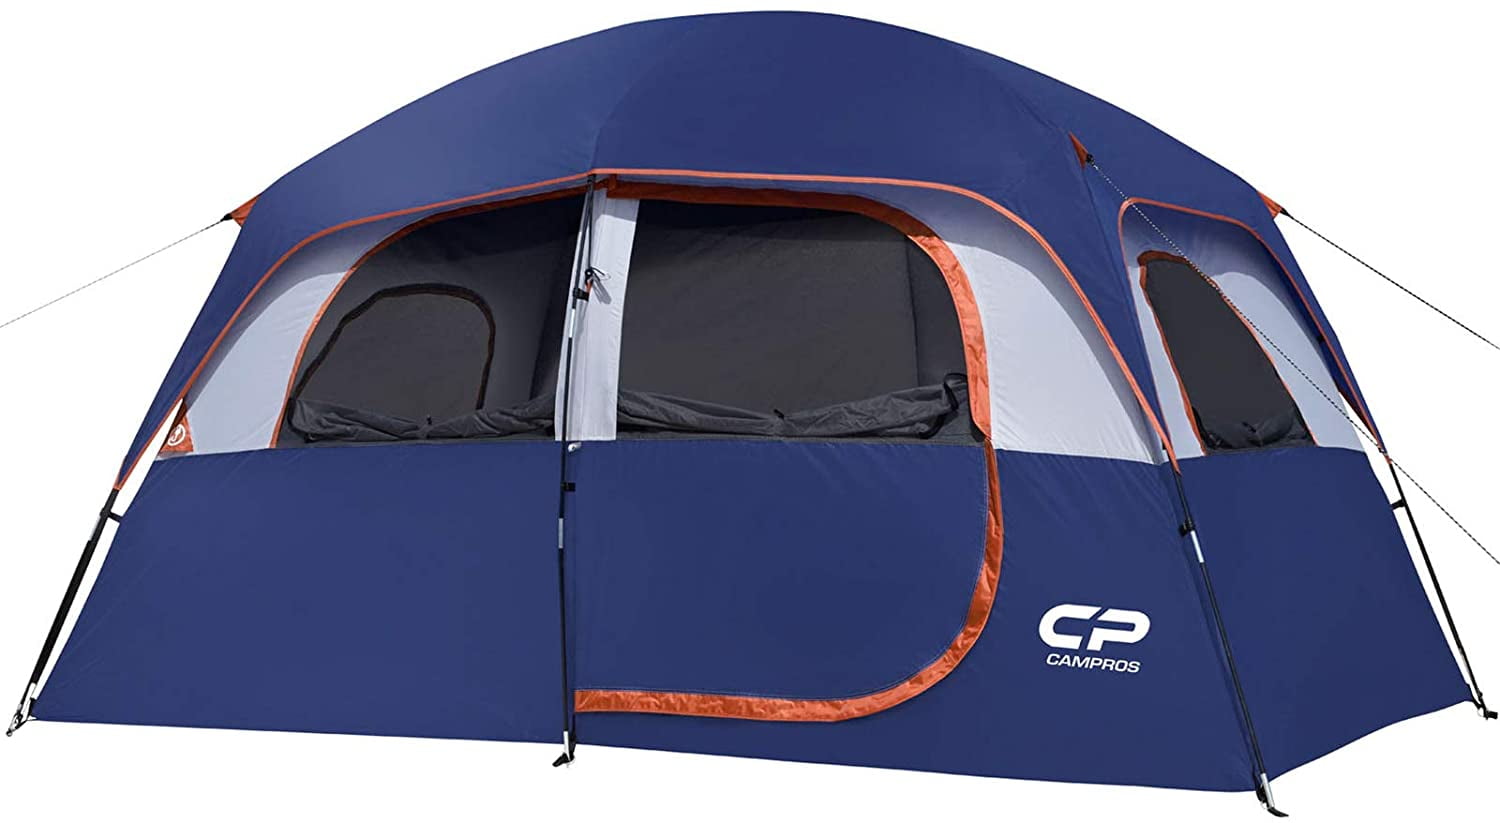 CAMPROS 6 Person Camping Tent, Easy Set up Waterproof Dome Tents